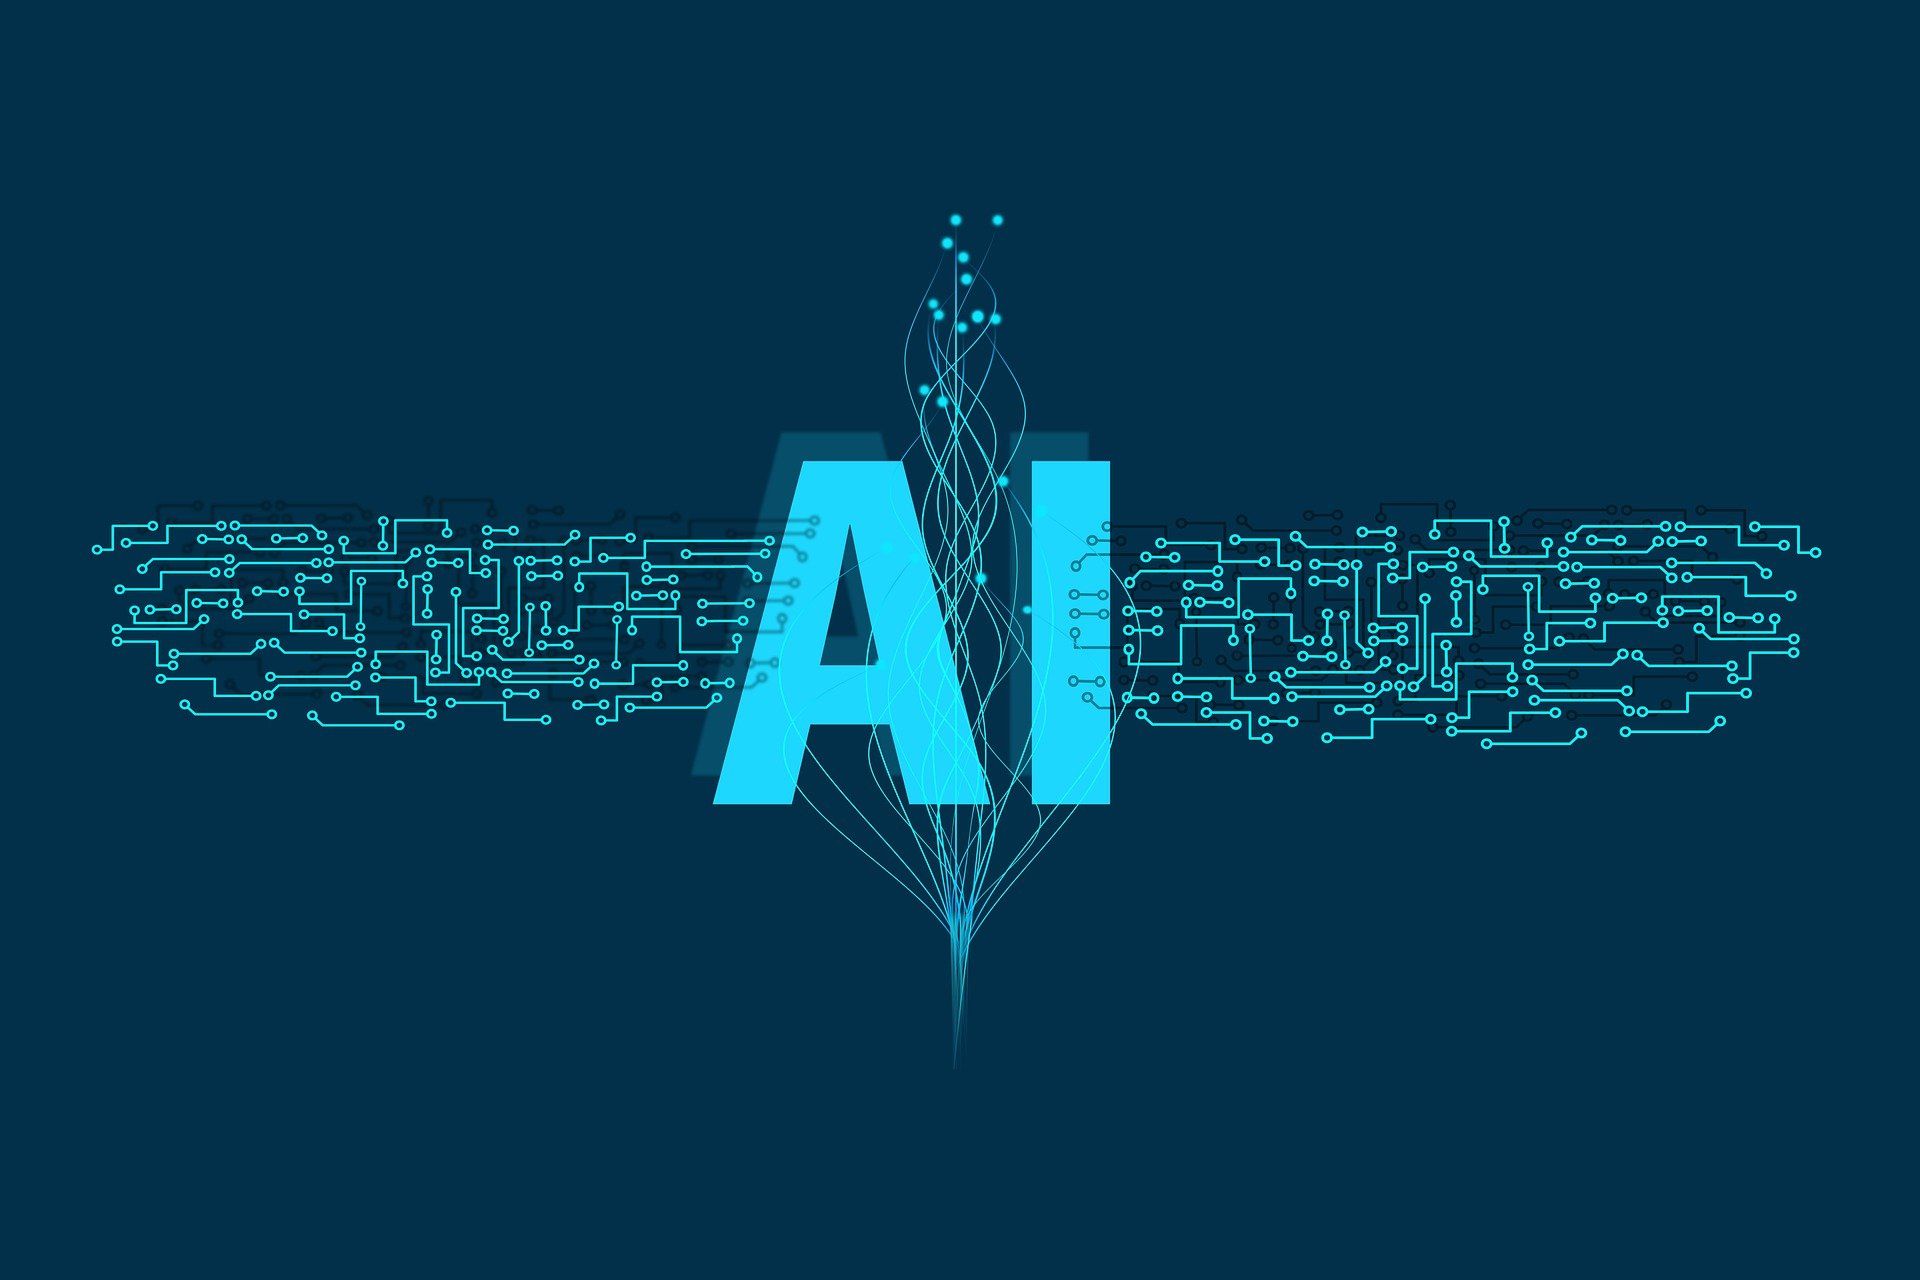 Enhancing Efficiency and Productivity with an AI Response Generator?